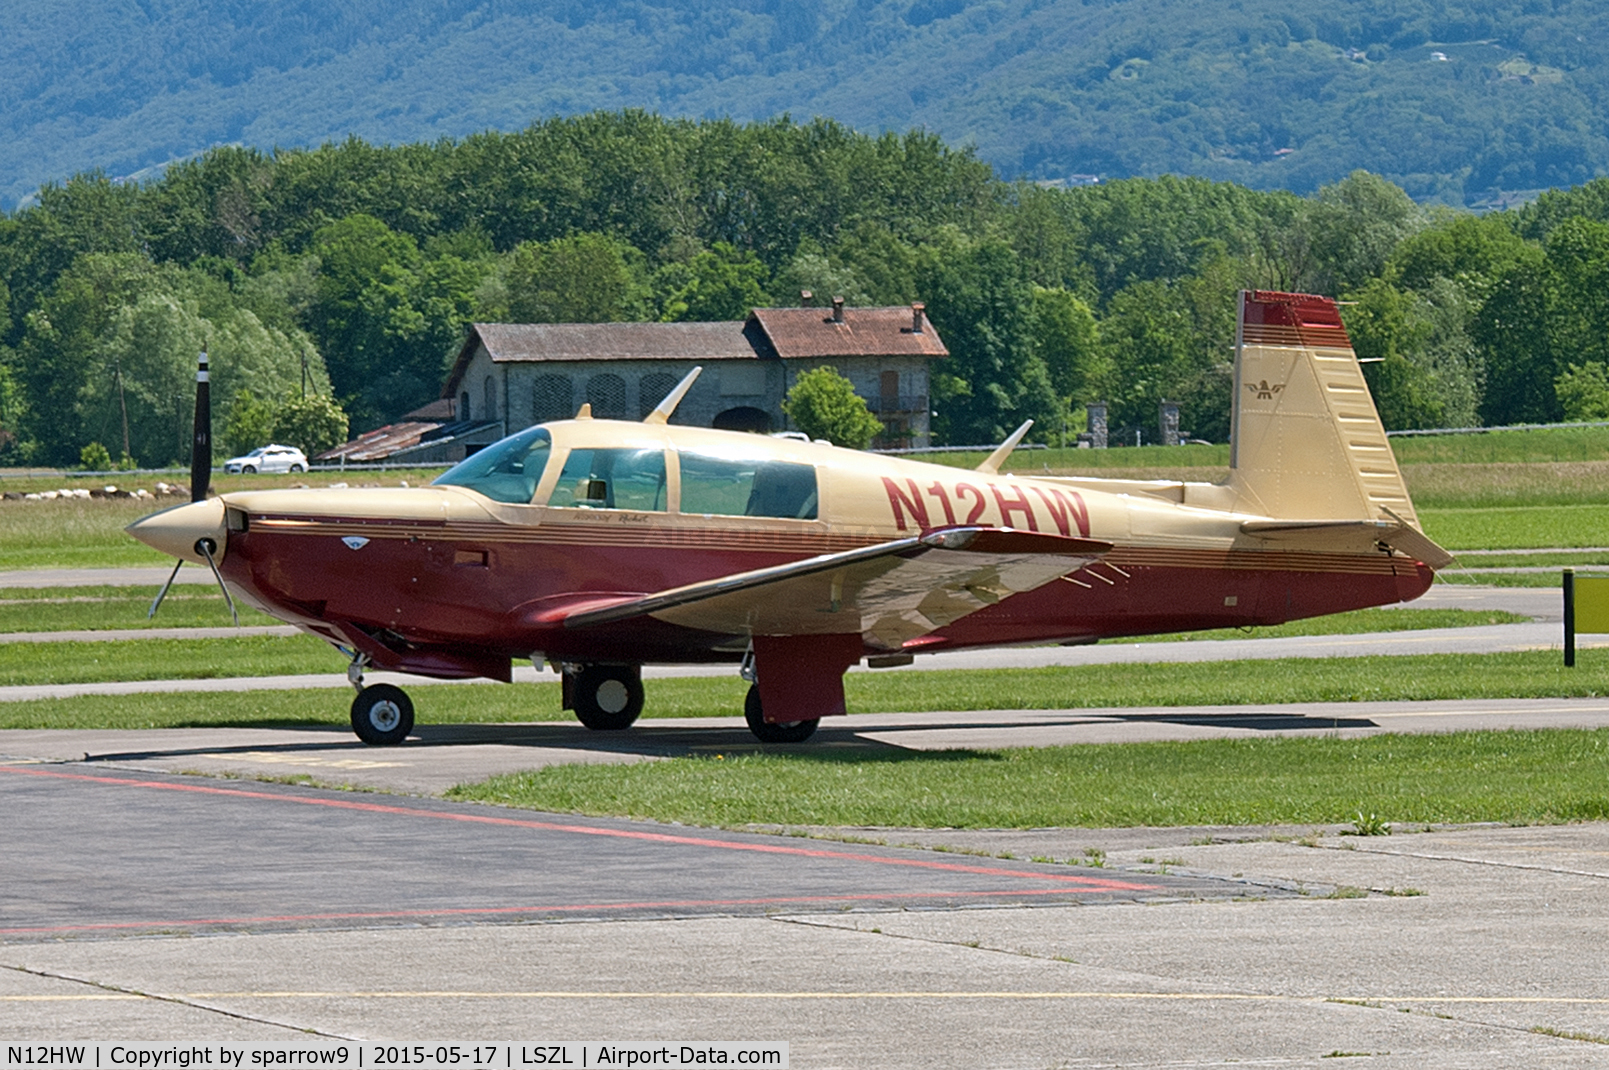 N12HW, 1981 Mooney M20K C/N 25-0557, A Mooney M20K with a Rocket-conversion: with a Continental TSIO-520-NB